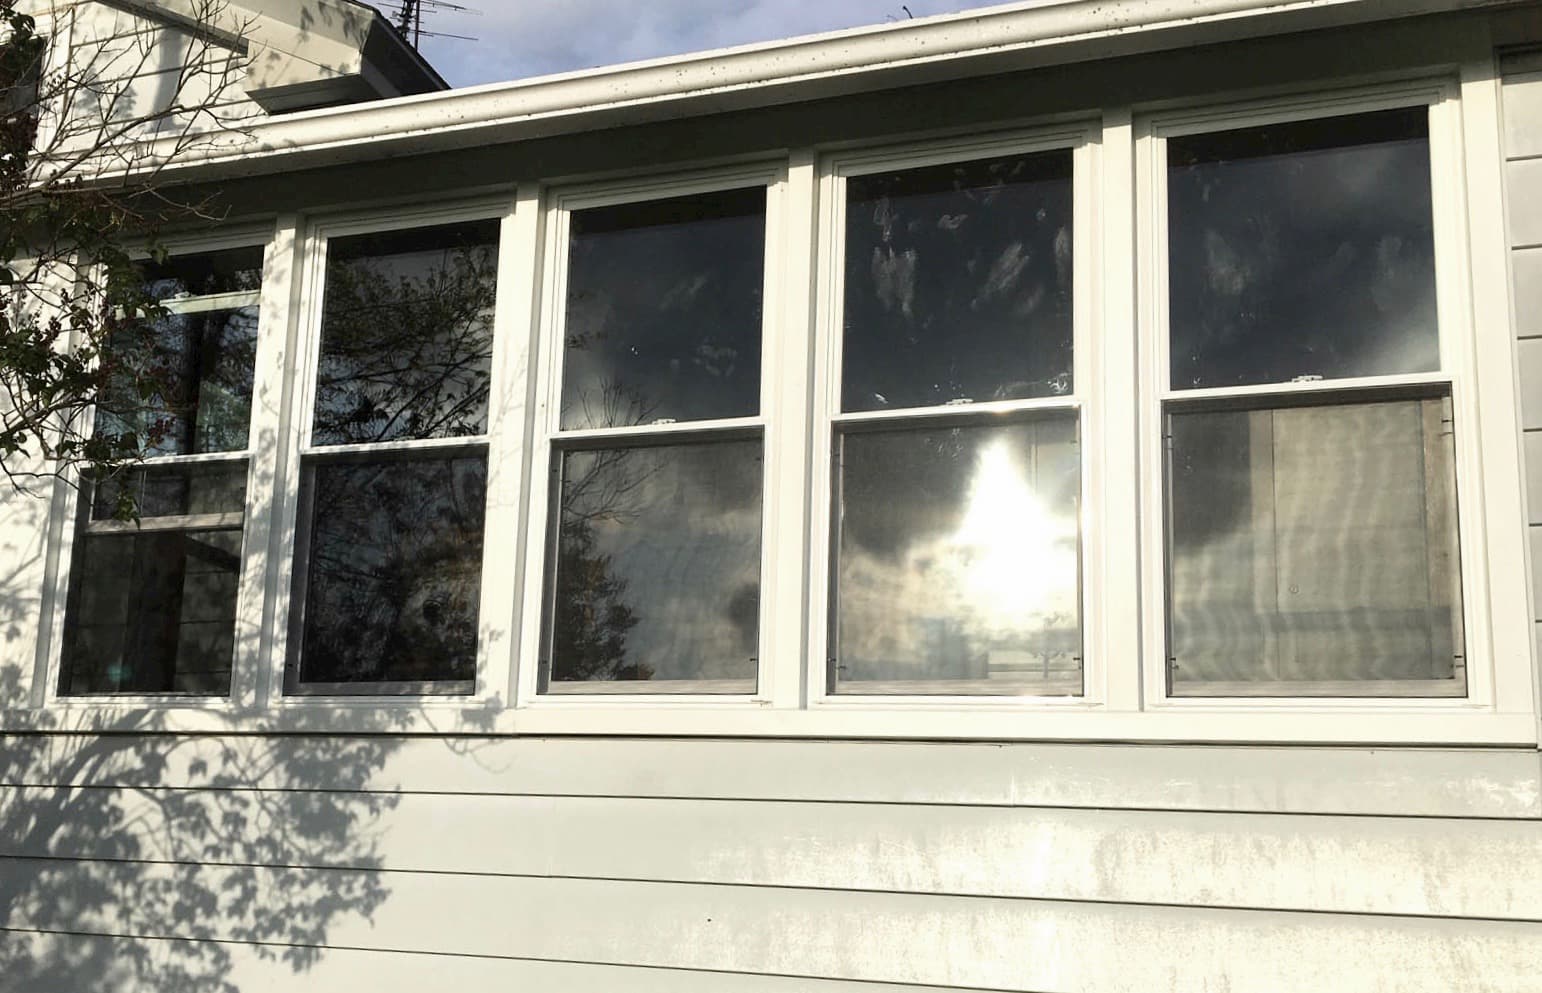 Exterior view of new vinyl double-hung windows on sun porch